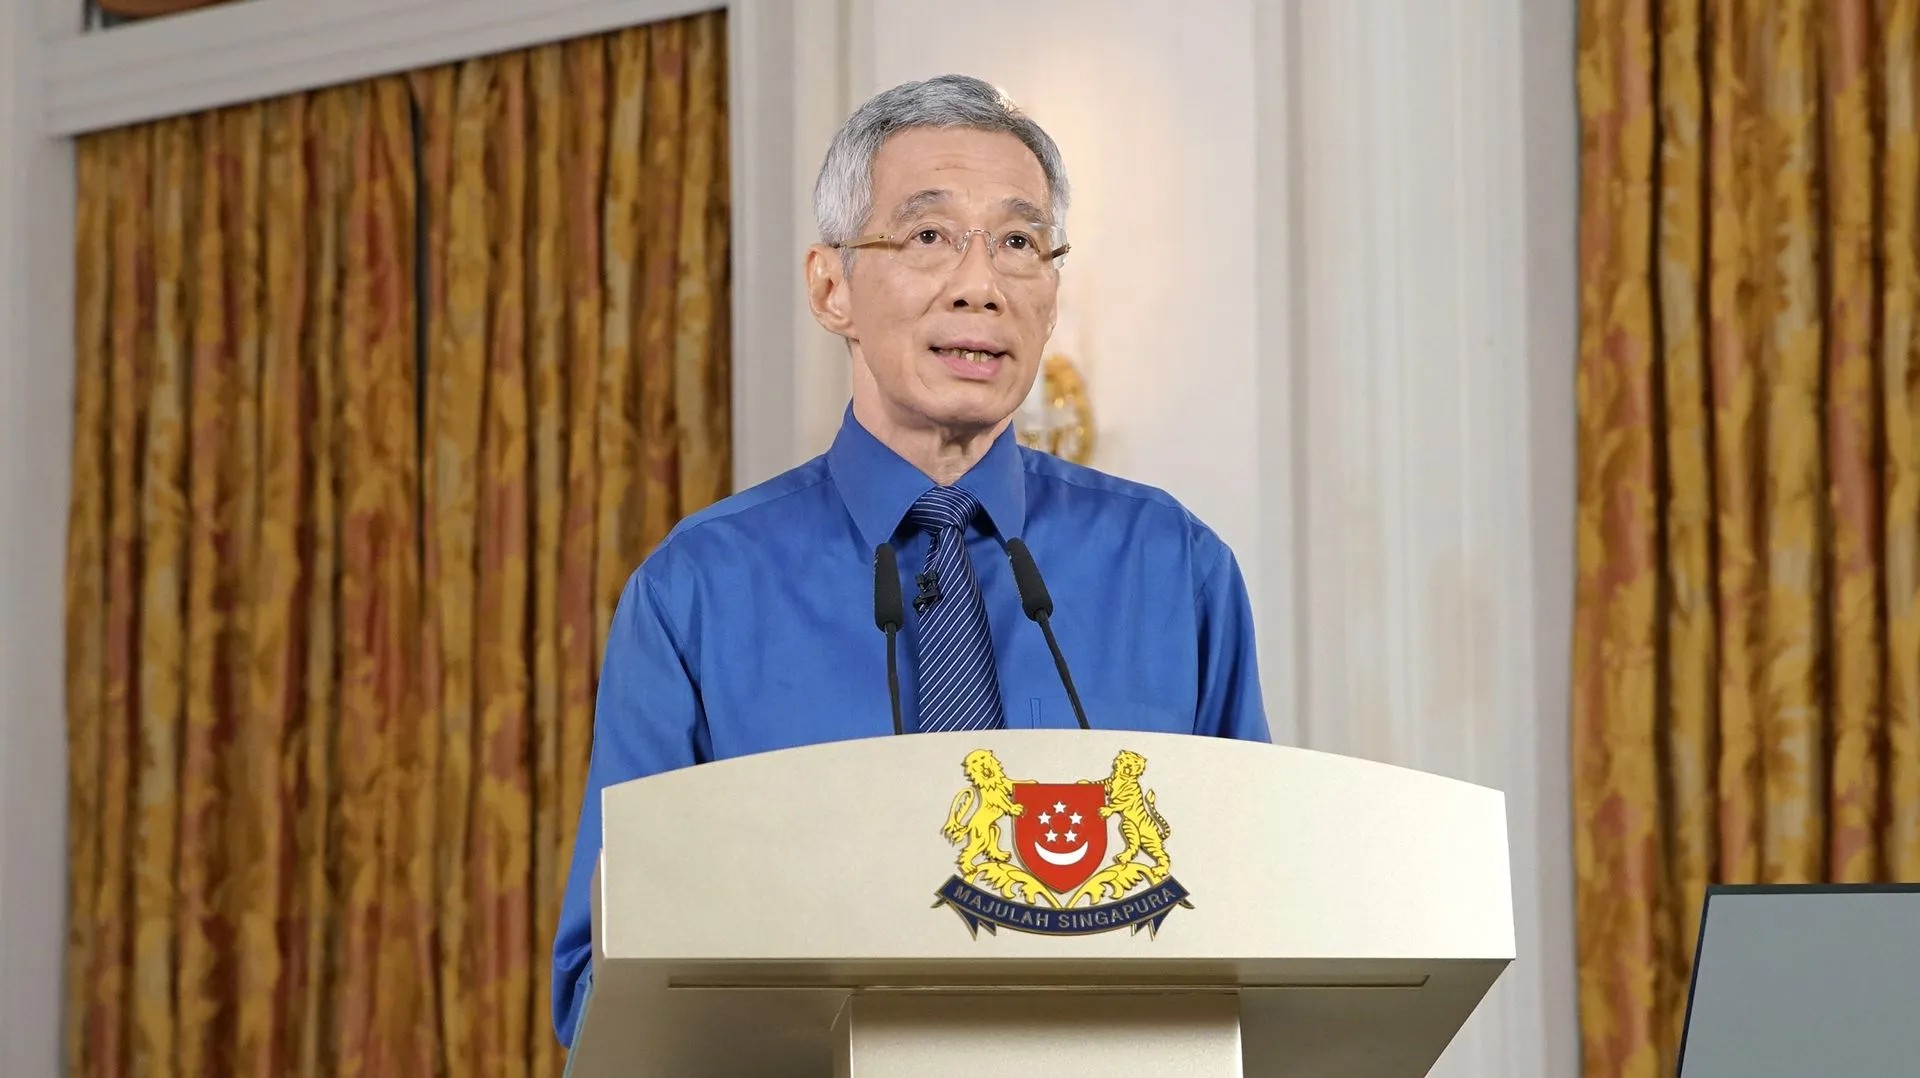 Lee Hsien Loong, Prime Minister of Singapore wearing Blue Shirt and giving a speech